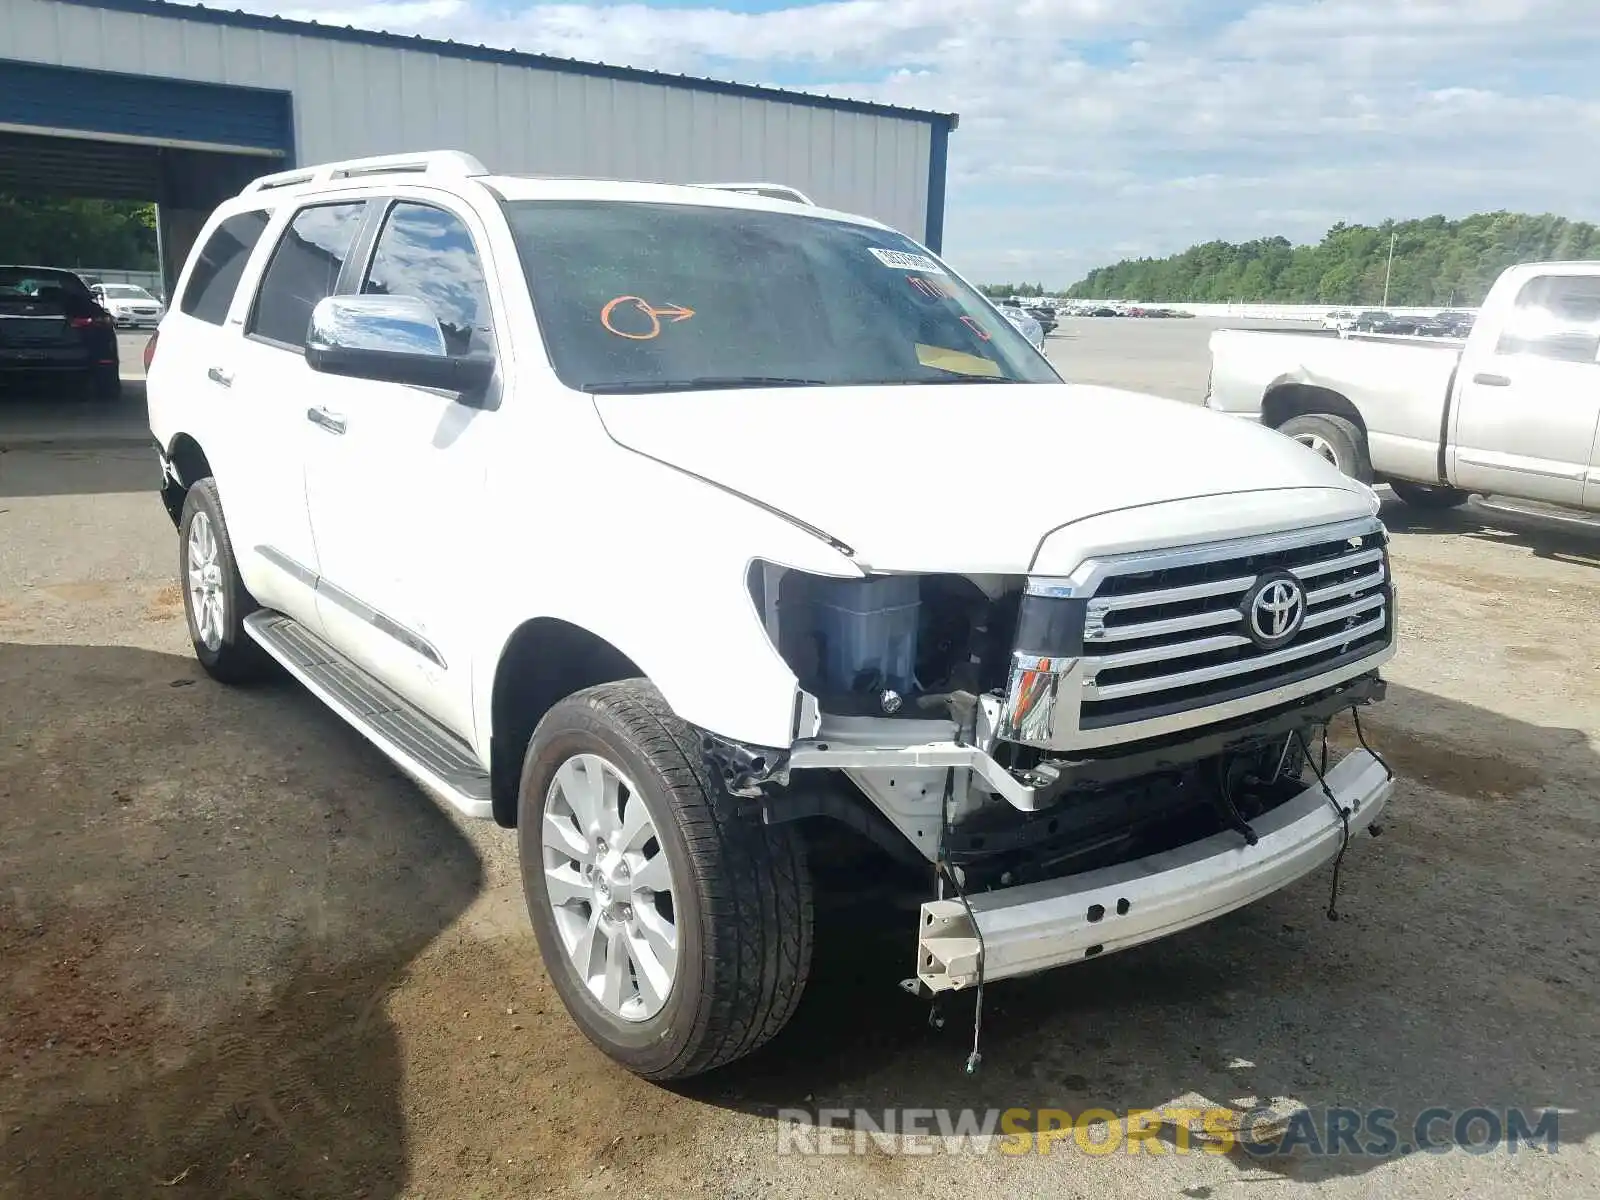 1 Photograph of a damaged car 5TDDY5G17KS170717 TOYOTA SEQUOIA 2019